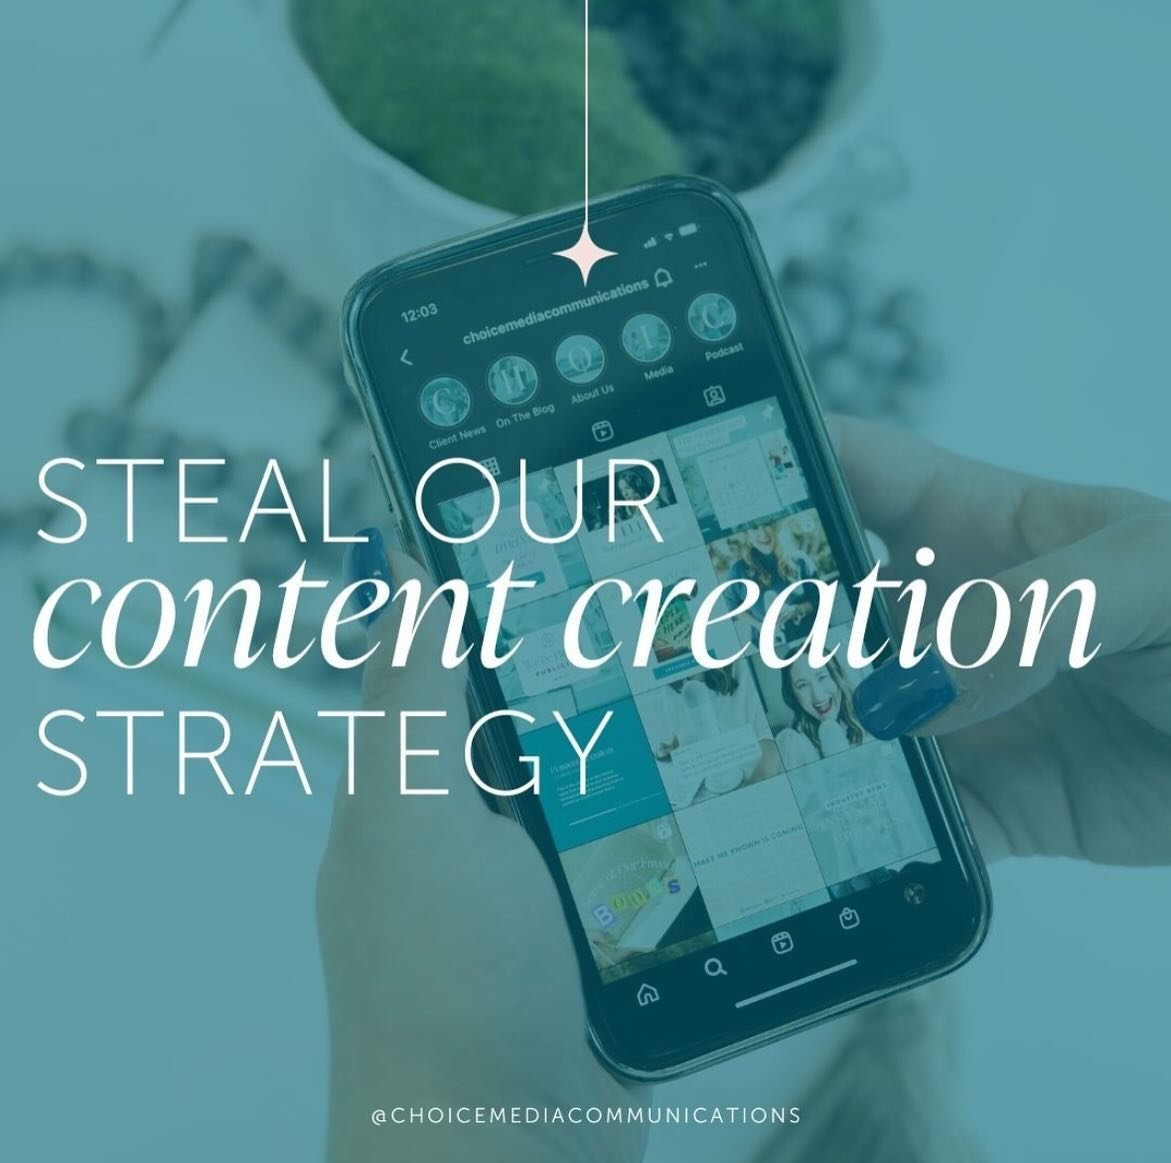 Say it with us 👏⁠
⁠
Content creation doesn&rsquo;t have to be hard and time-consuming. It doesn&rsquo;t have to be something you dread doing. ⁠
⁠
How? ⁠
⁠
Swipe to see an overview of how we create our content 👉⁠

⁠
Ready to get creating? Let&rsquo;